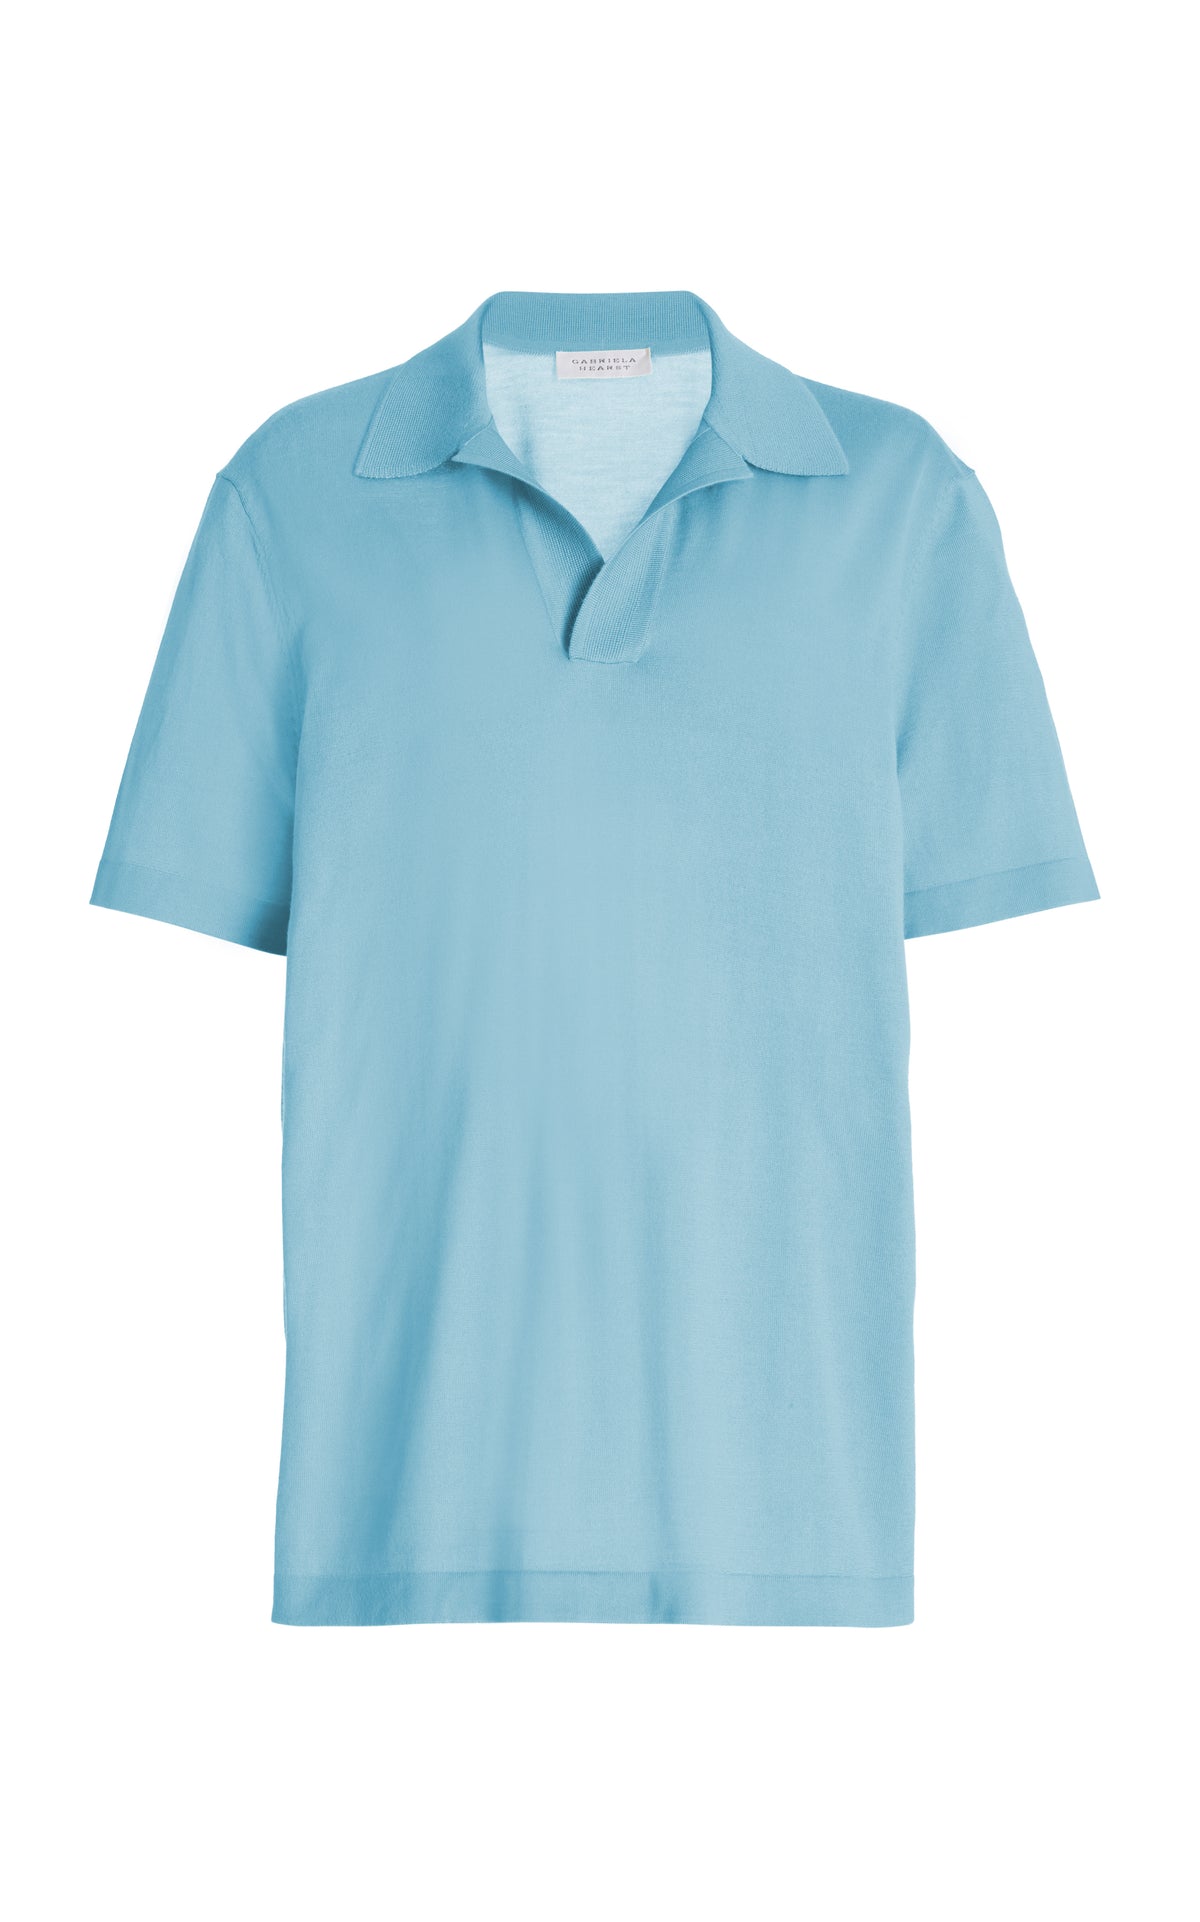 Stendhal Knit Short Sleeve Polo in Mineral Blue Cashmere